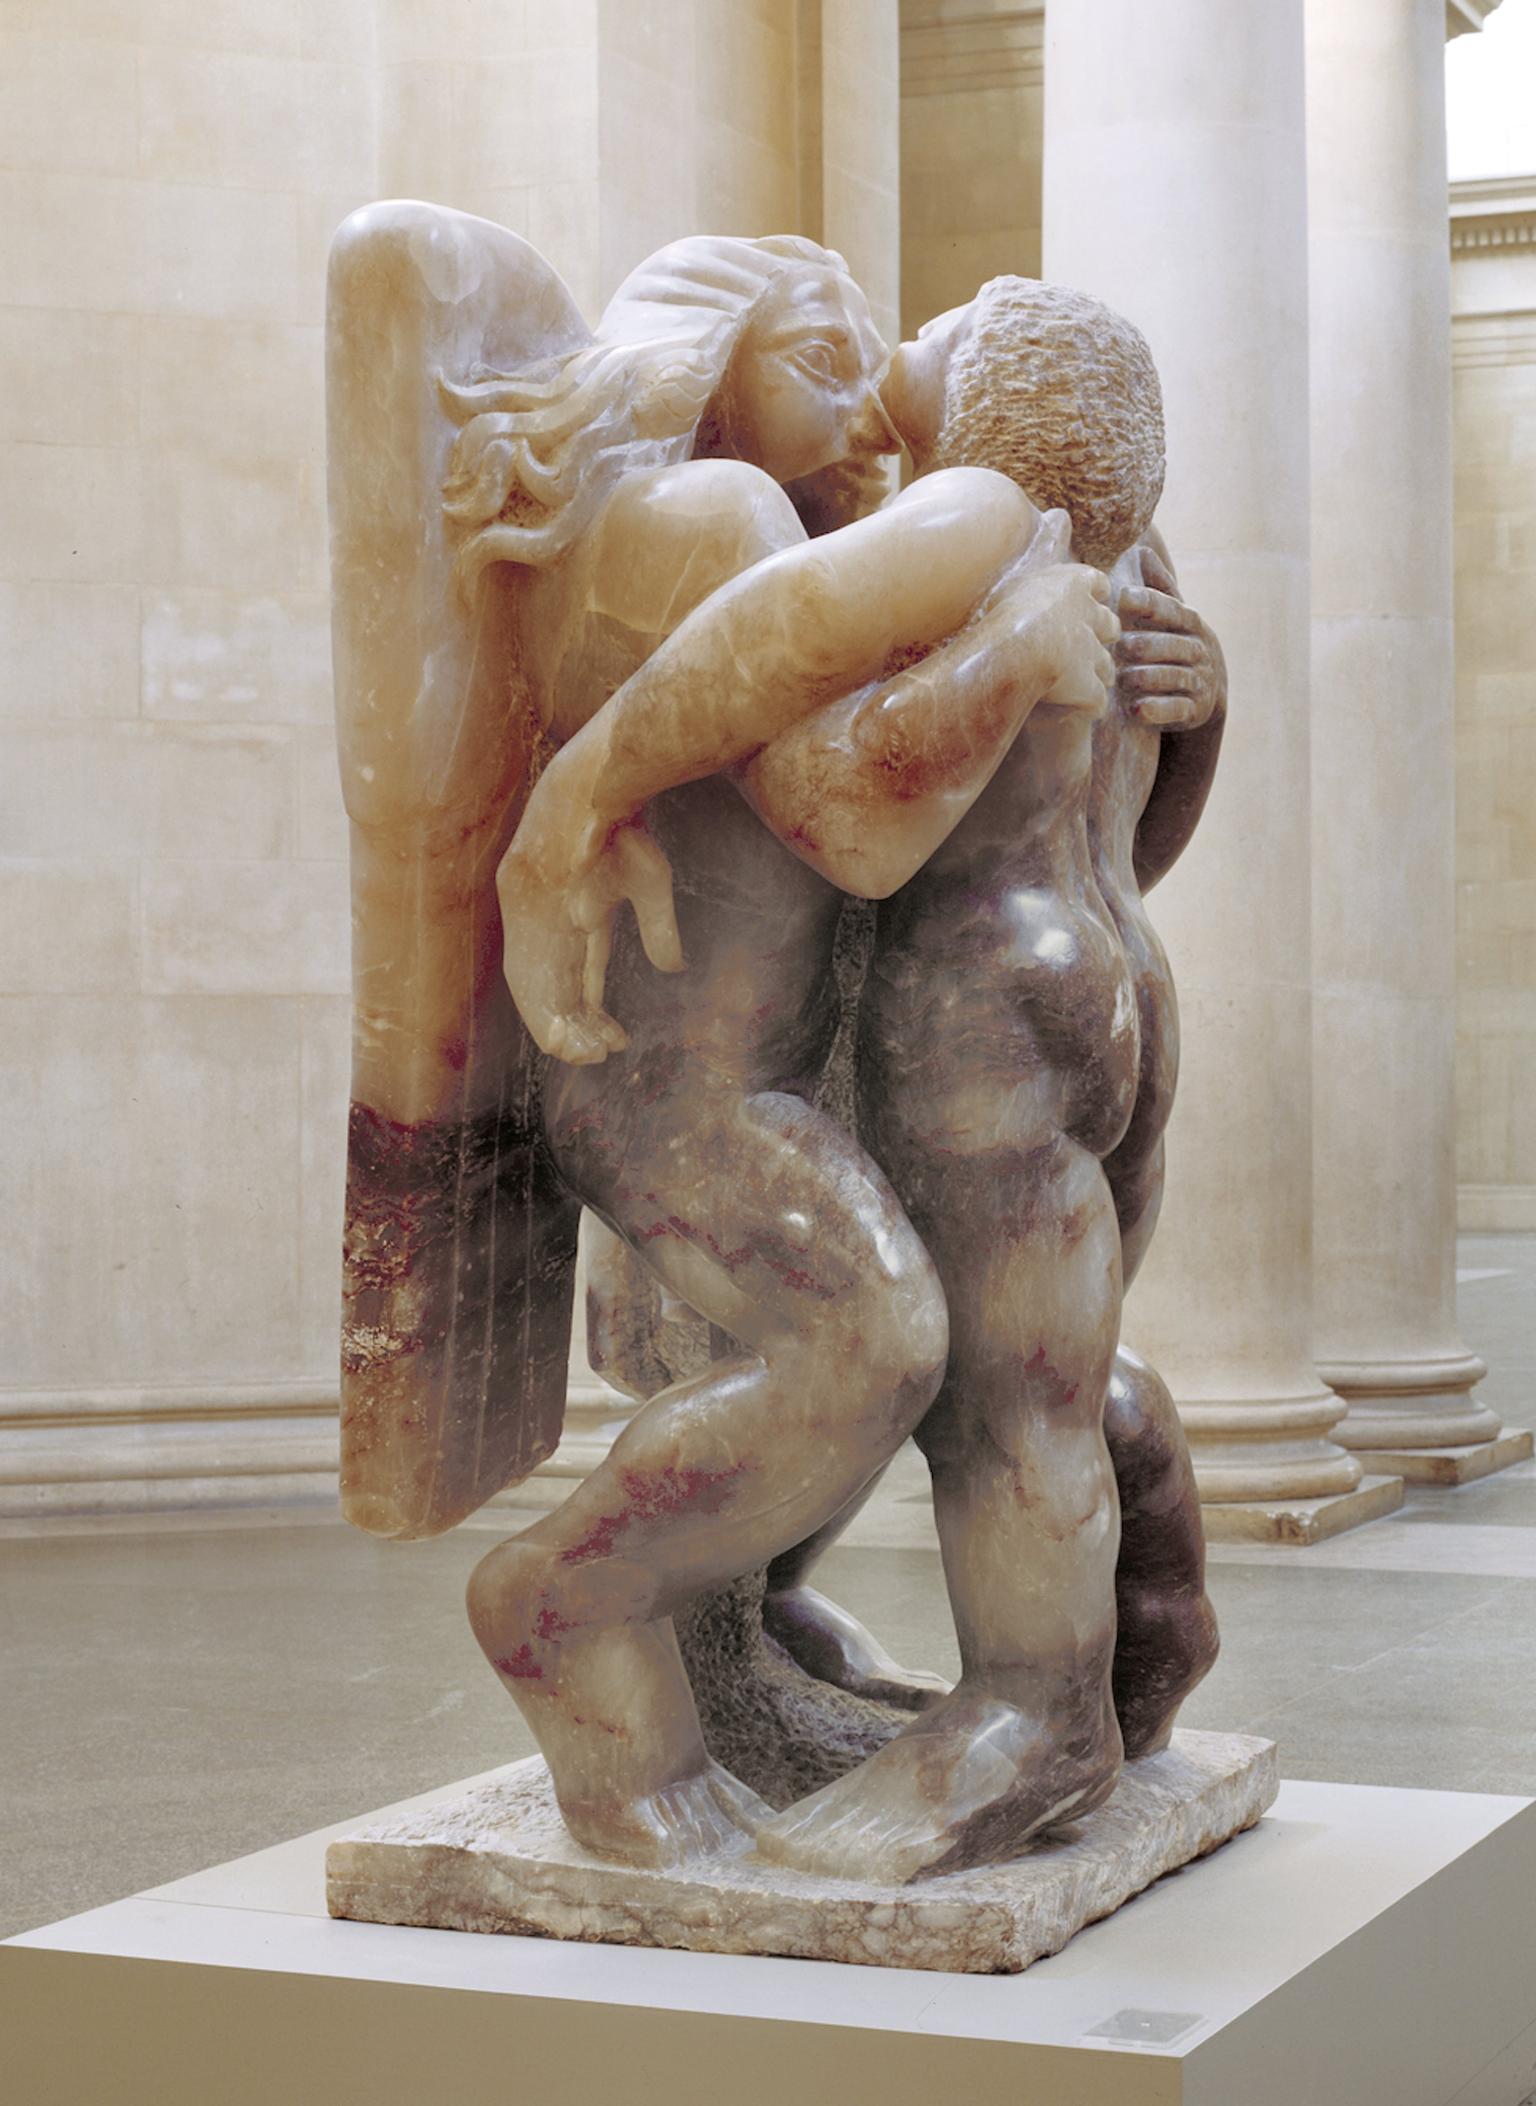 Sculpture depicting angel and man, both upright, with arms around each other.